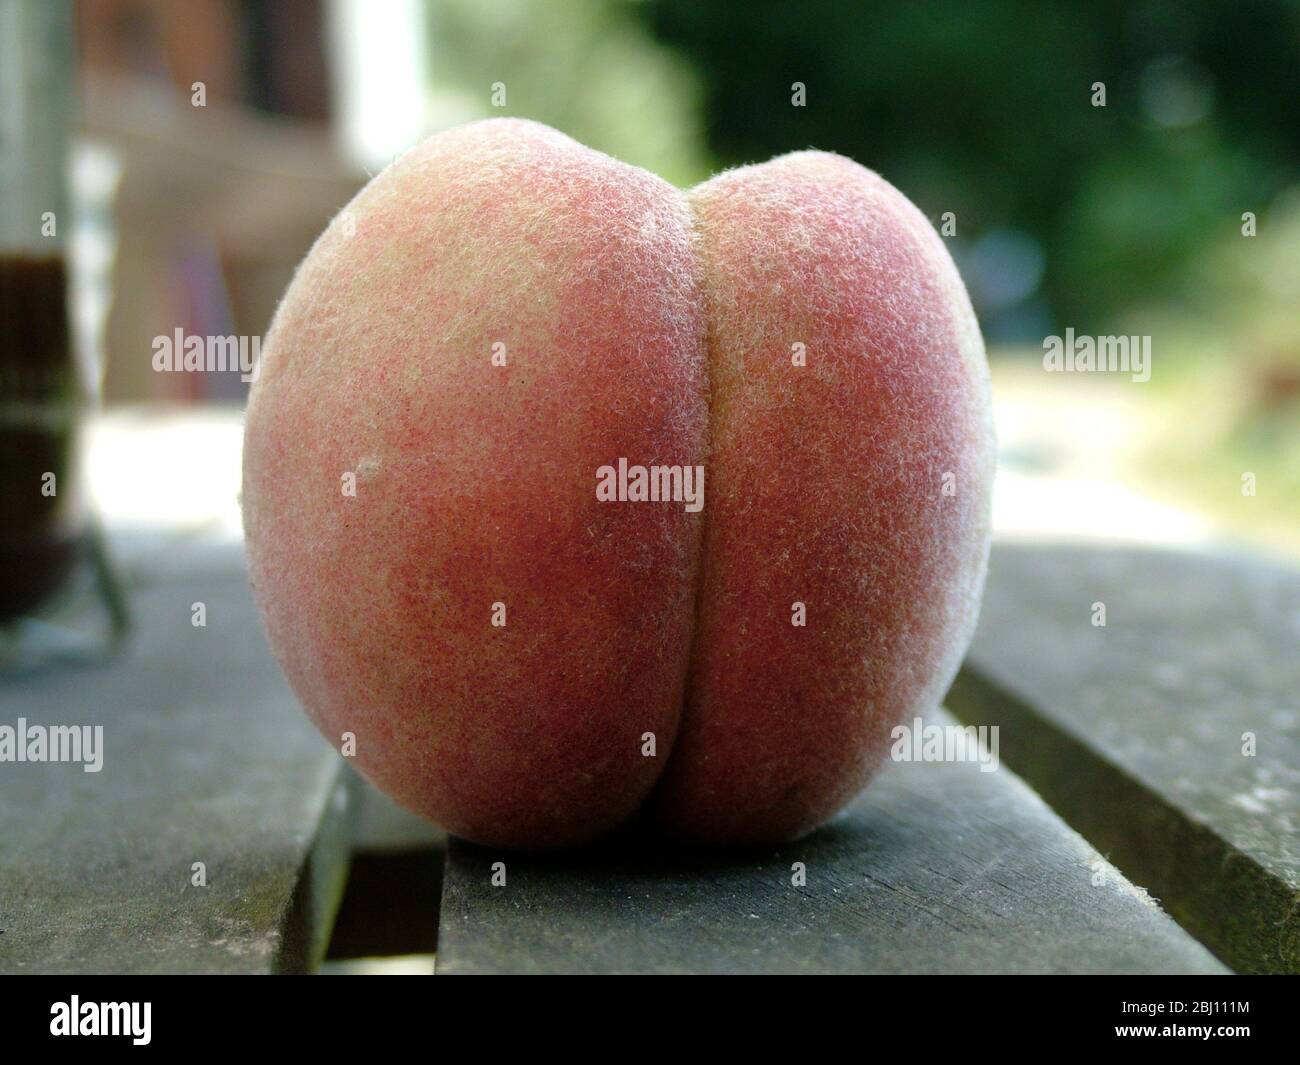 Very downy white fleshed peach on garden table outdoors - Stock Photo